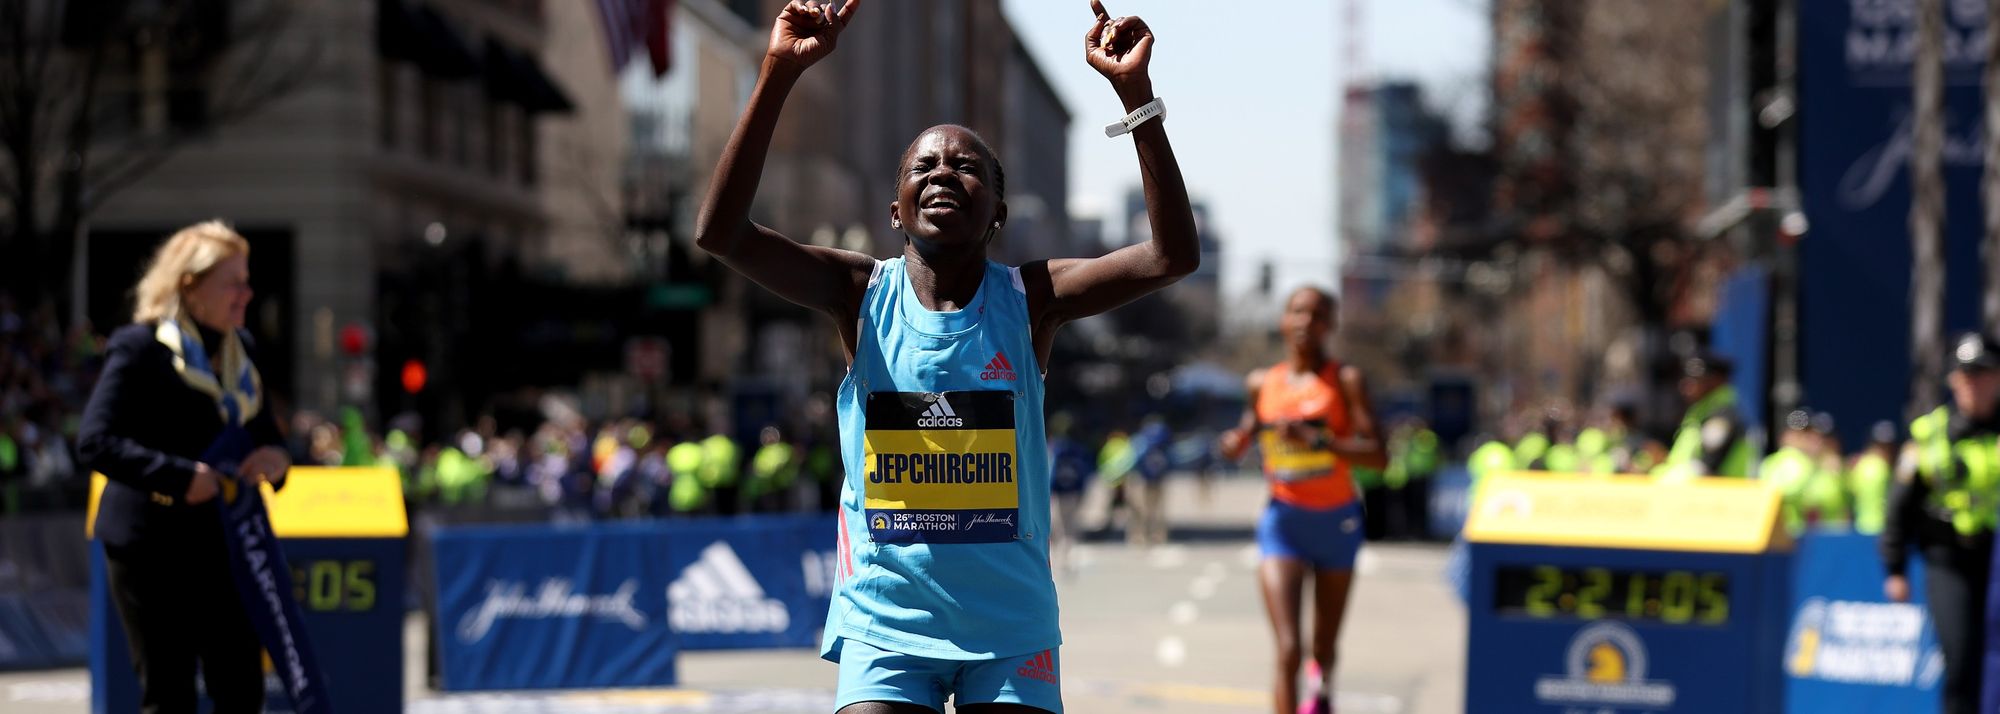 Peres Jepchirchir and Evans Chebet ensured that two vastly different races both ended with thrilling finishes.